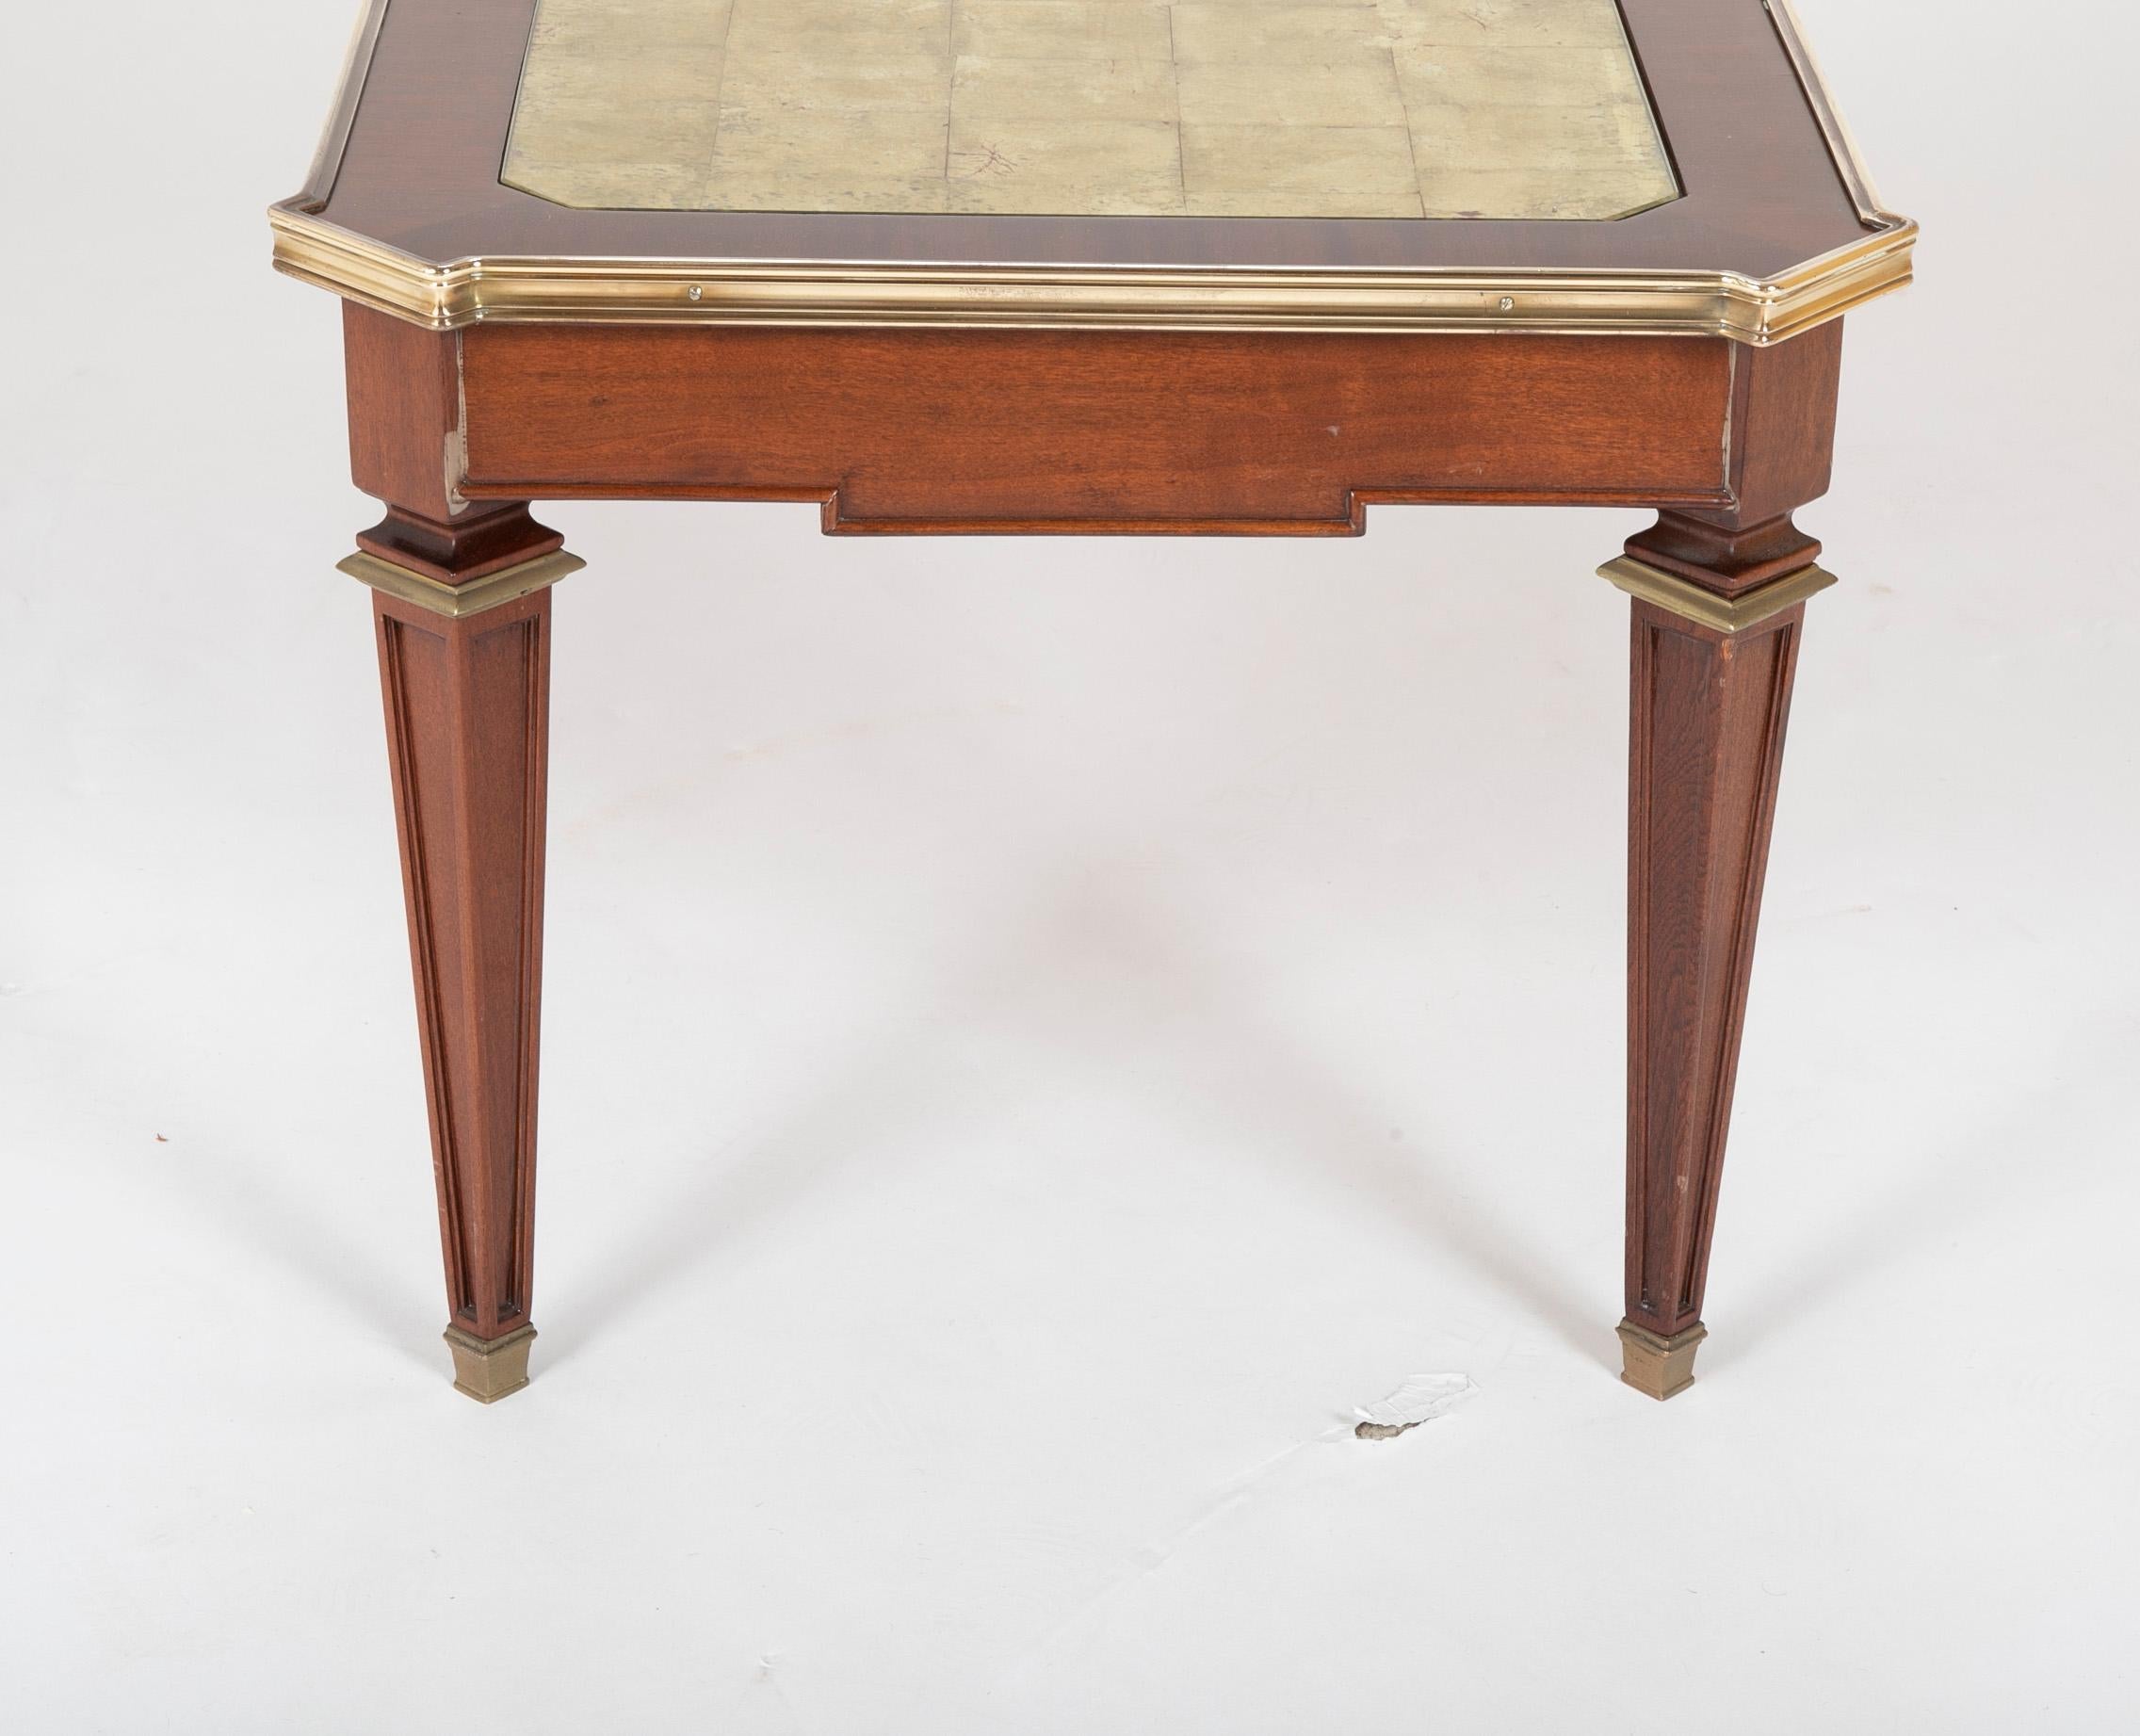 20th Century Maison Jansen Mahogany Coffee Table with Gold Leaf Glass Top and Bronze Mounts